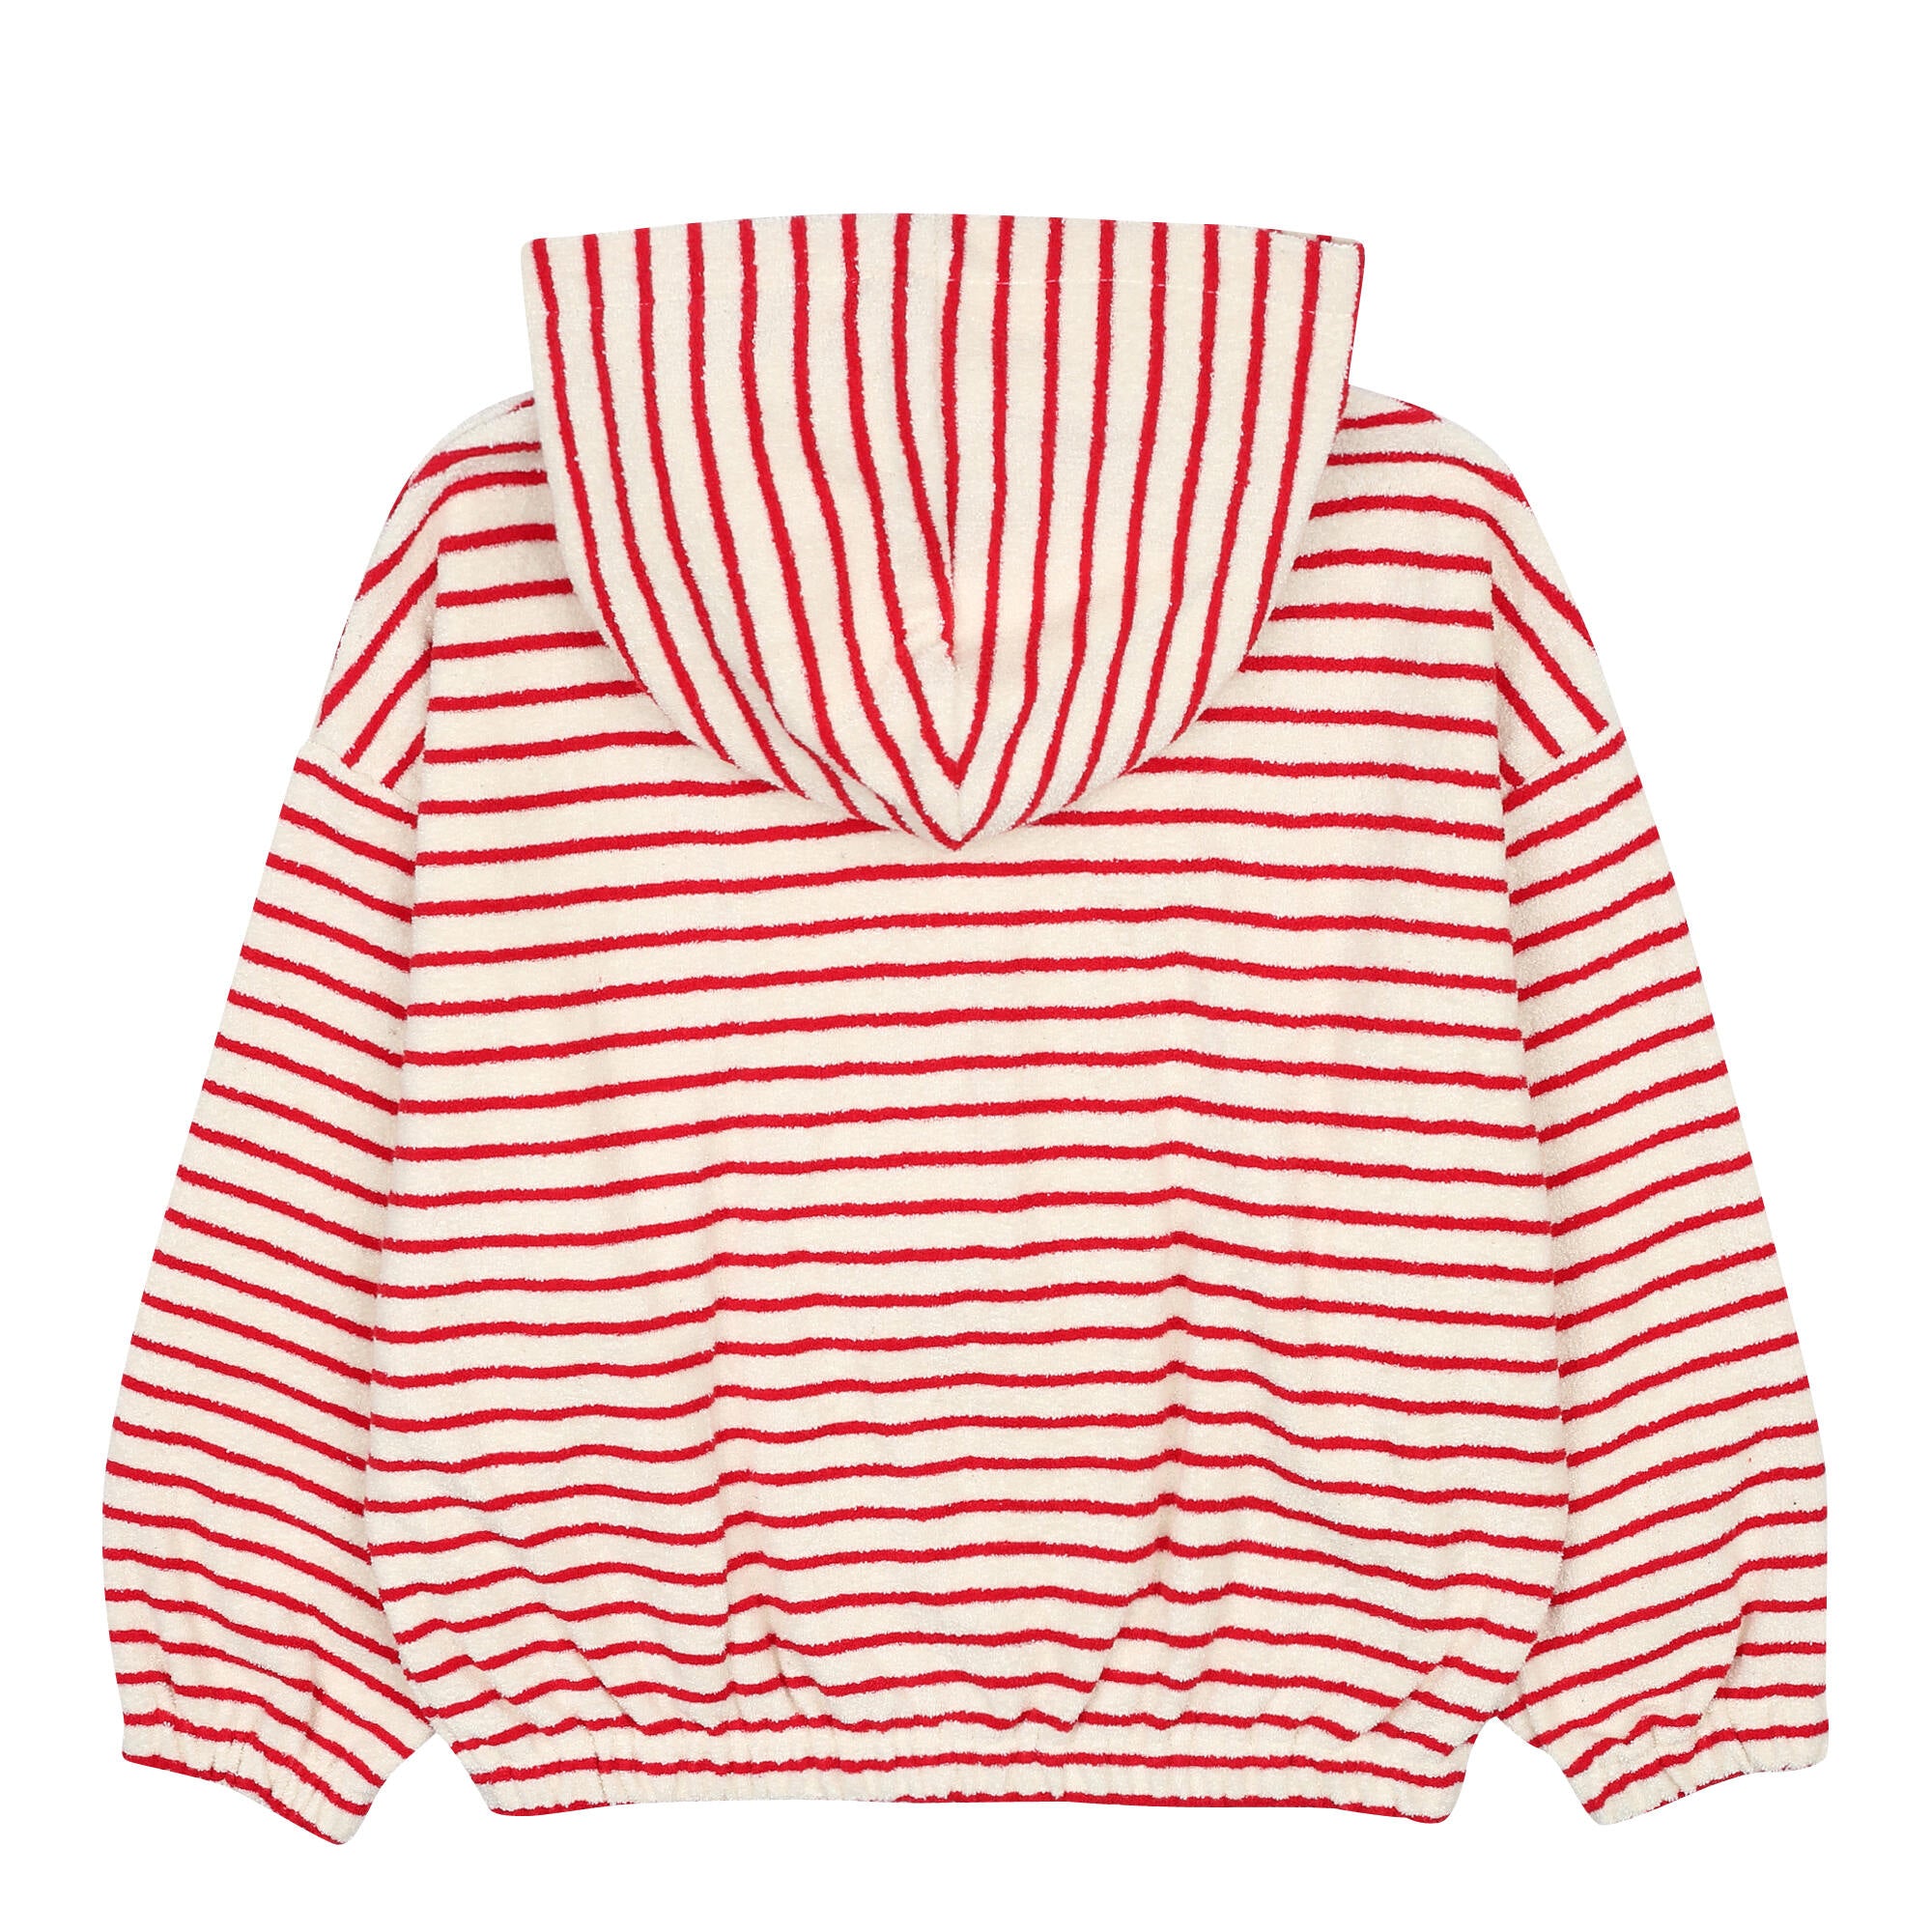 Boys & Girls Red Stripes Zip-Up Top